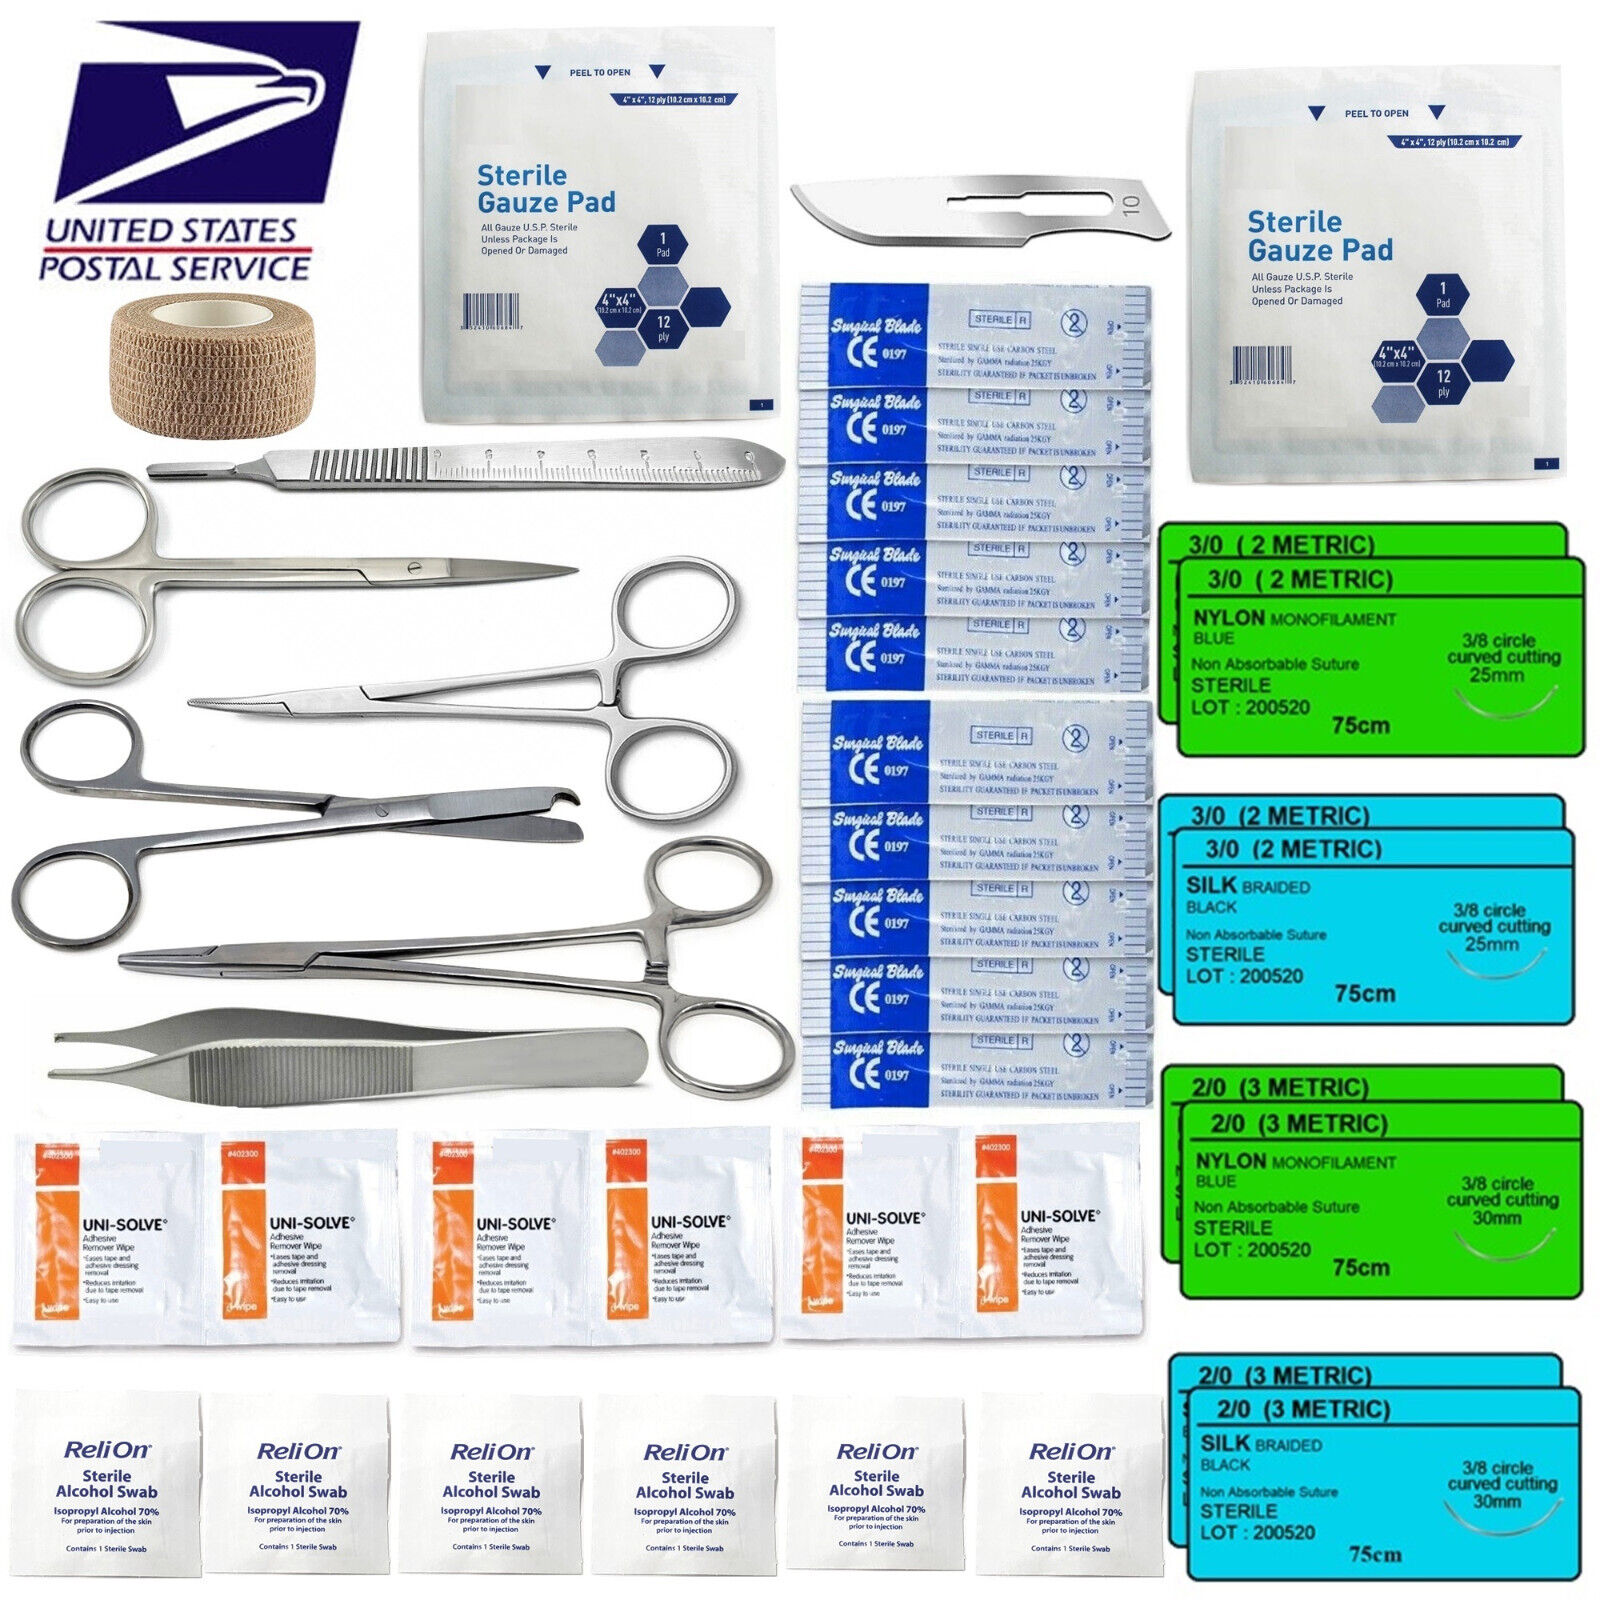 Surgical Suture Kit Basic First Aid Medical Travel Kit - 39 Pieces USA MADE !! Unbranded 39 Pcs Kit - фотография #3